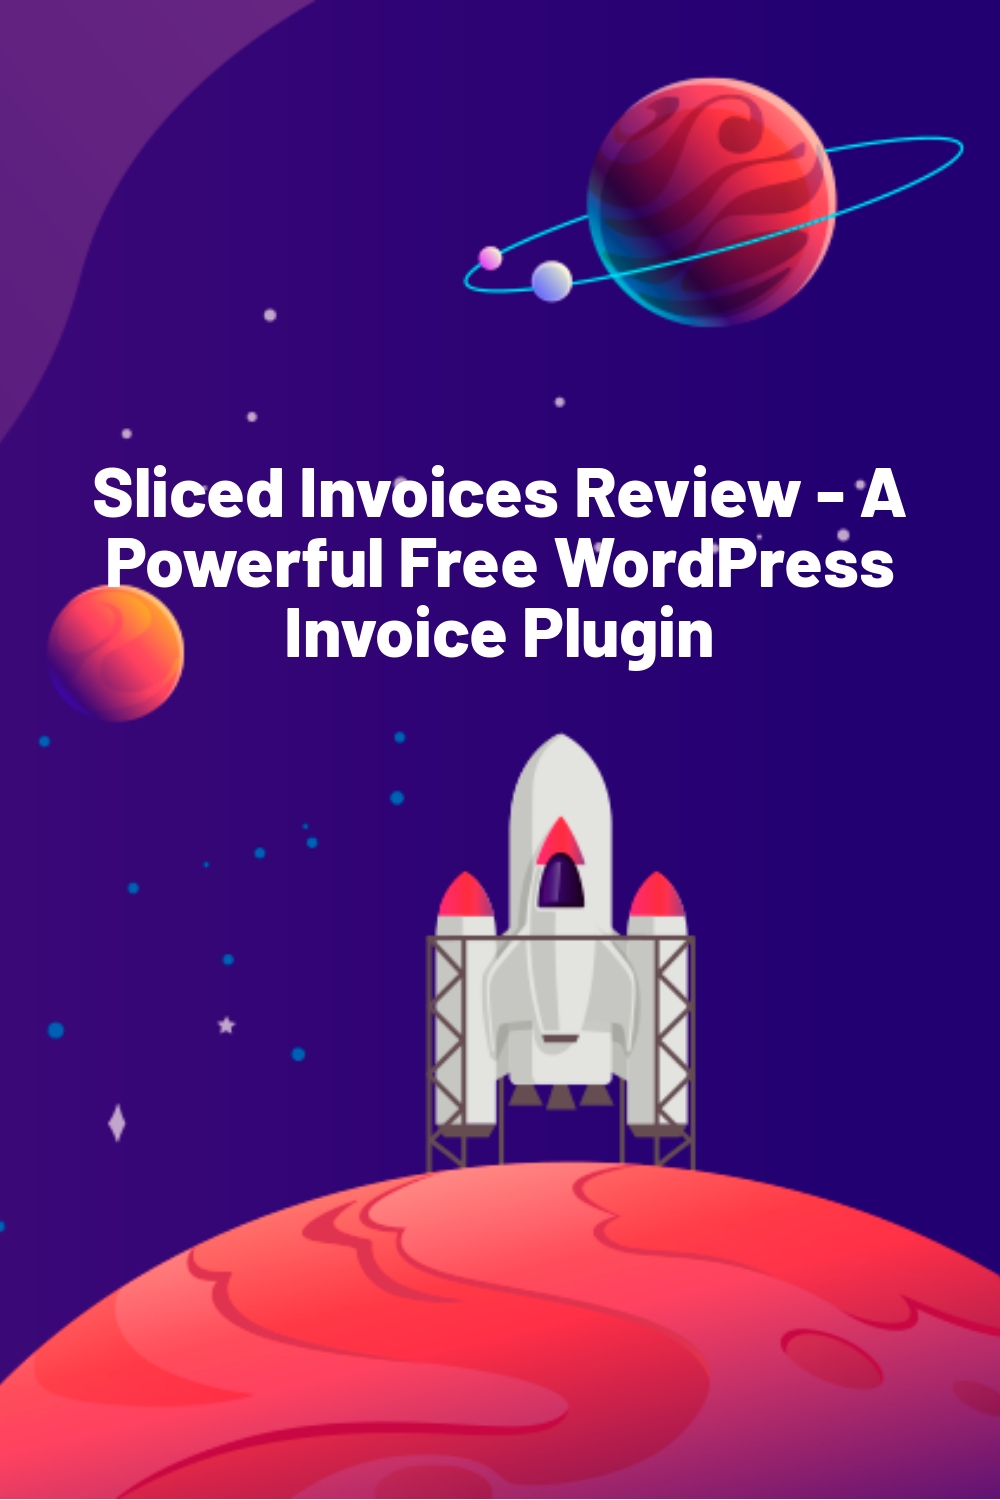 Sliced Invoices Review – A Powerful Free WordPress Invoice Plugin